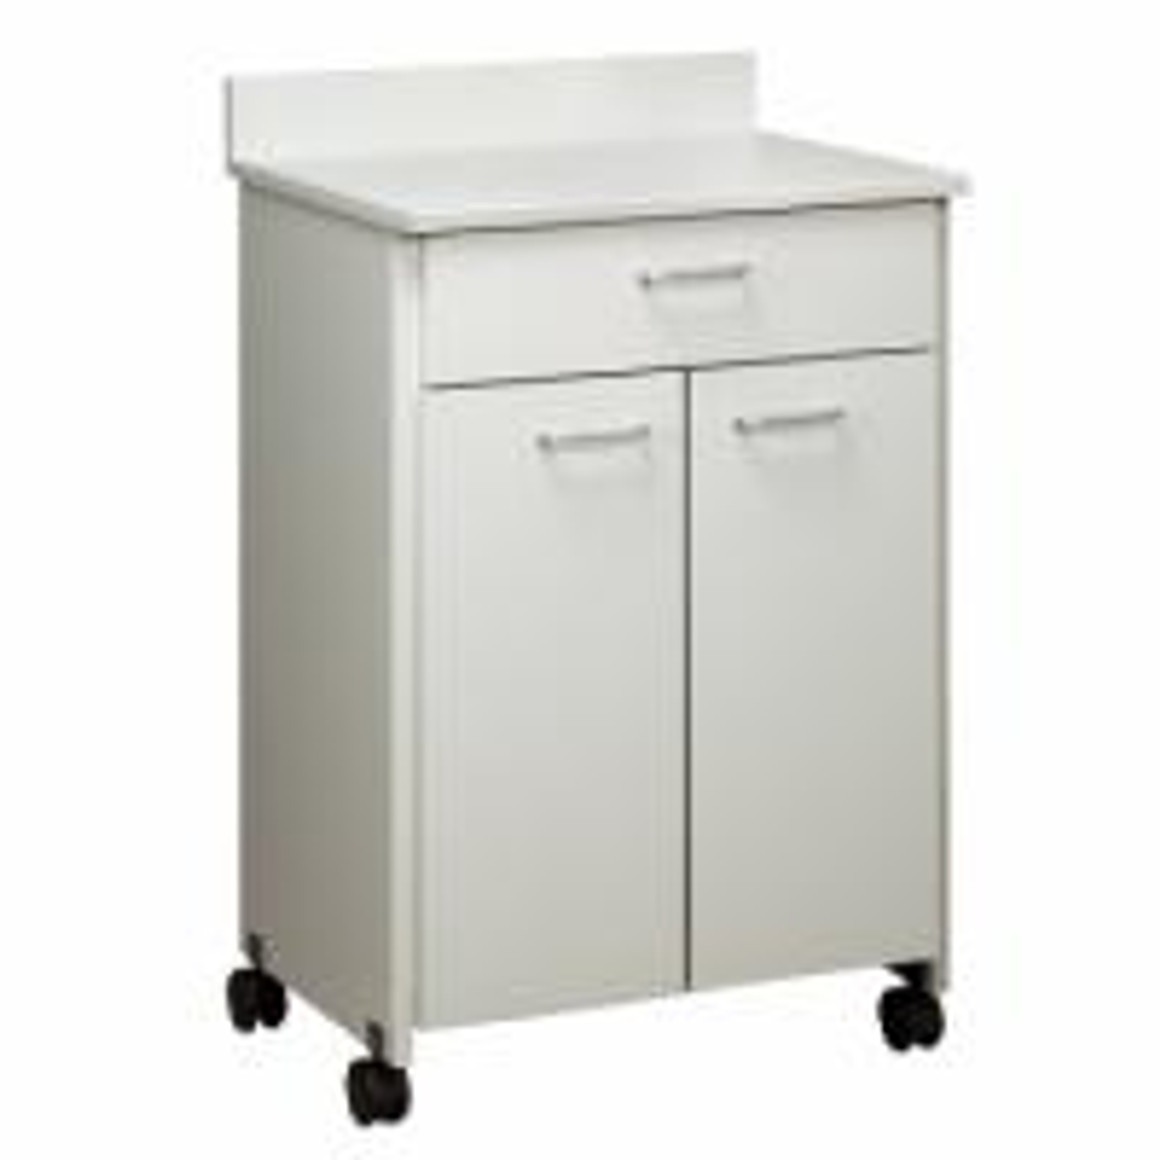 Clintonclean Mobile Treatment Cabinet With 2 Doors & 1 Drawer, Fossil